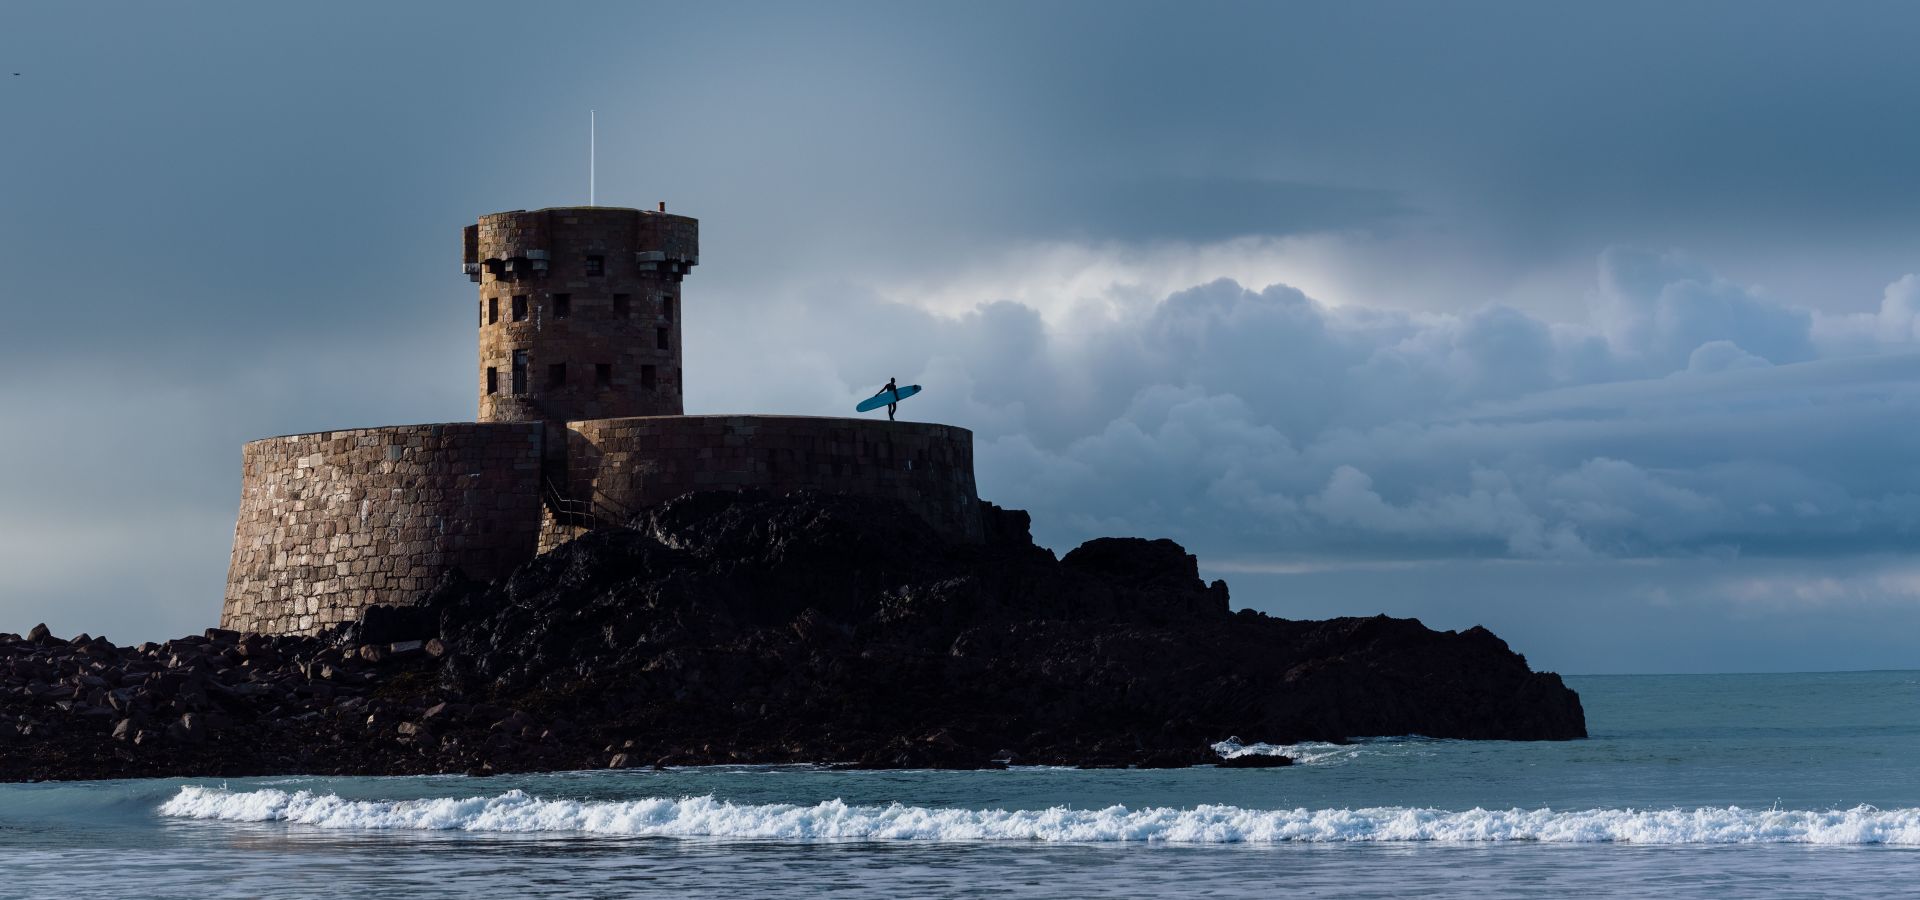 Surfer standing on a tower in the sea